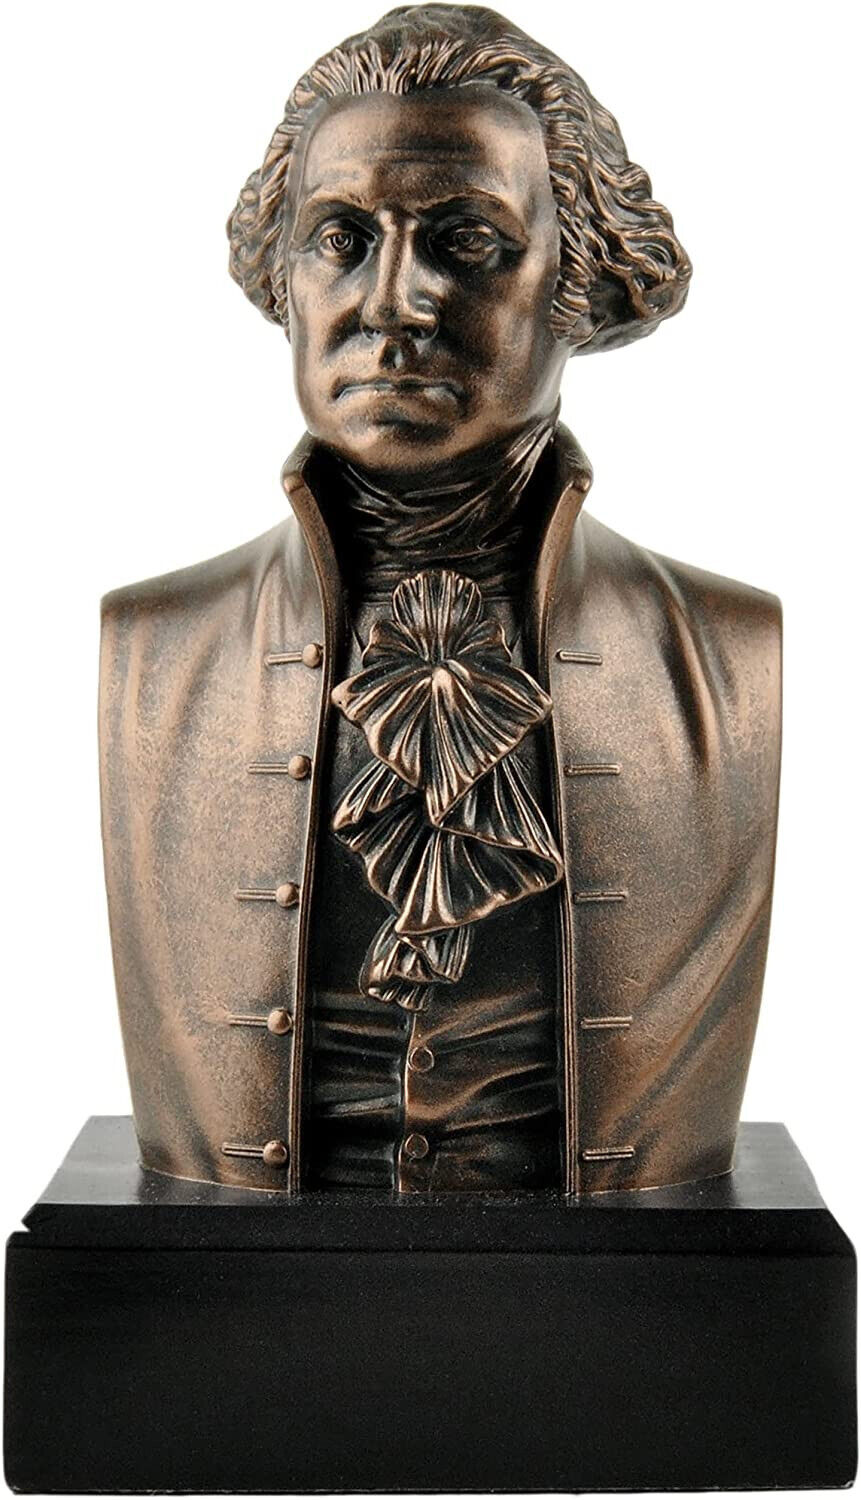 Historical George Washington Bust Statue Sculpture - Founding Father - MINT